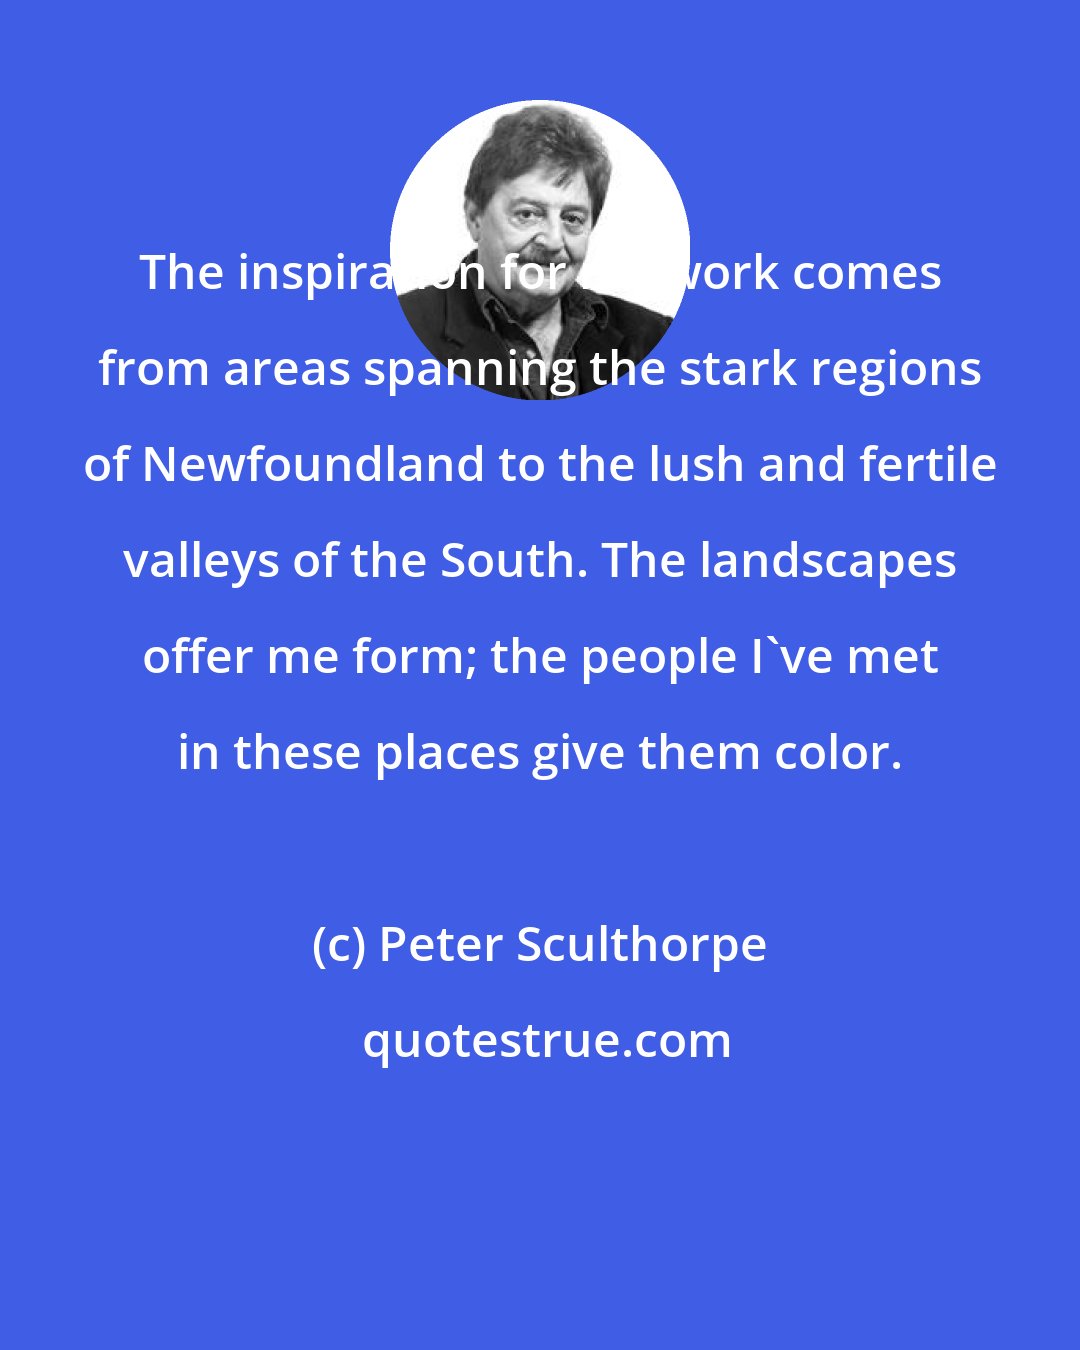 Peter Sculthorpe: The inspiration for my work comes from areas spanning the stark regions of Newfoundland to the lush and fertile valleys of the South. The landscapes offer me form; the people I've met in these places give them color.